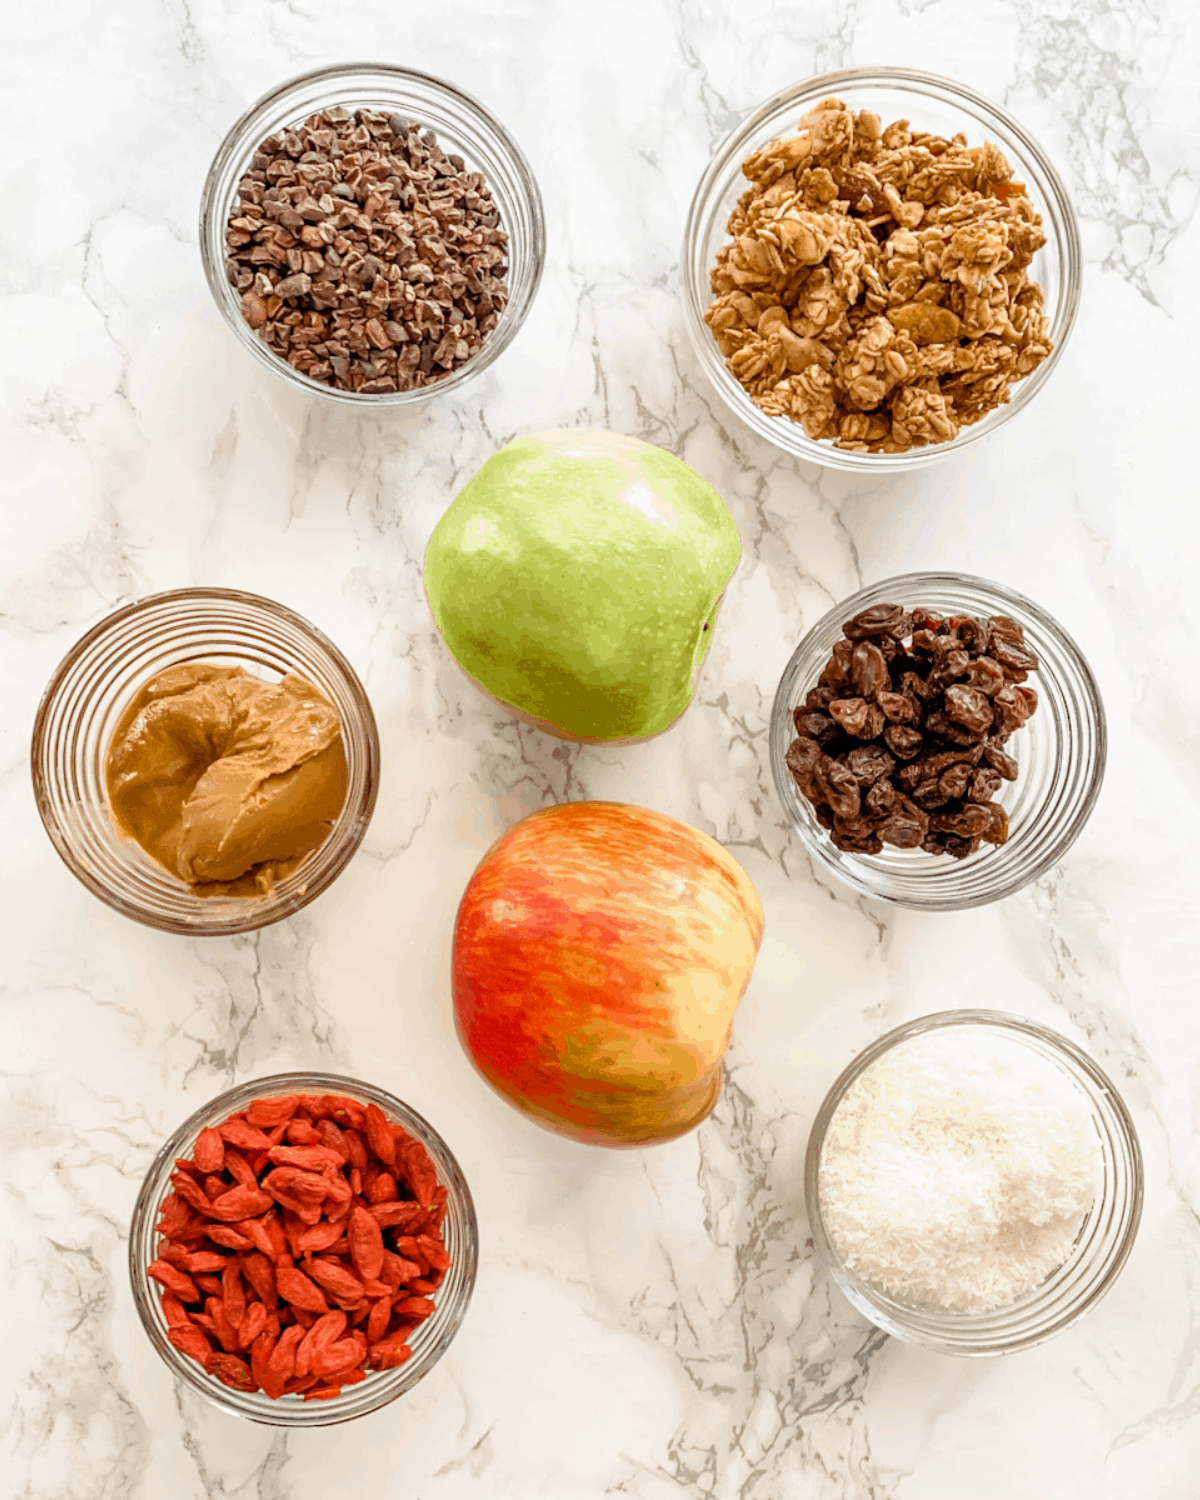 all the ingredients to make an apple peanut butter sandwich